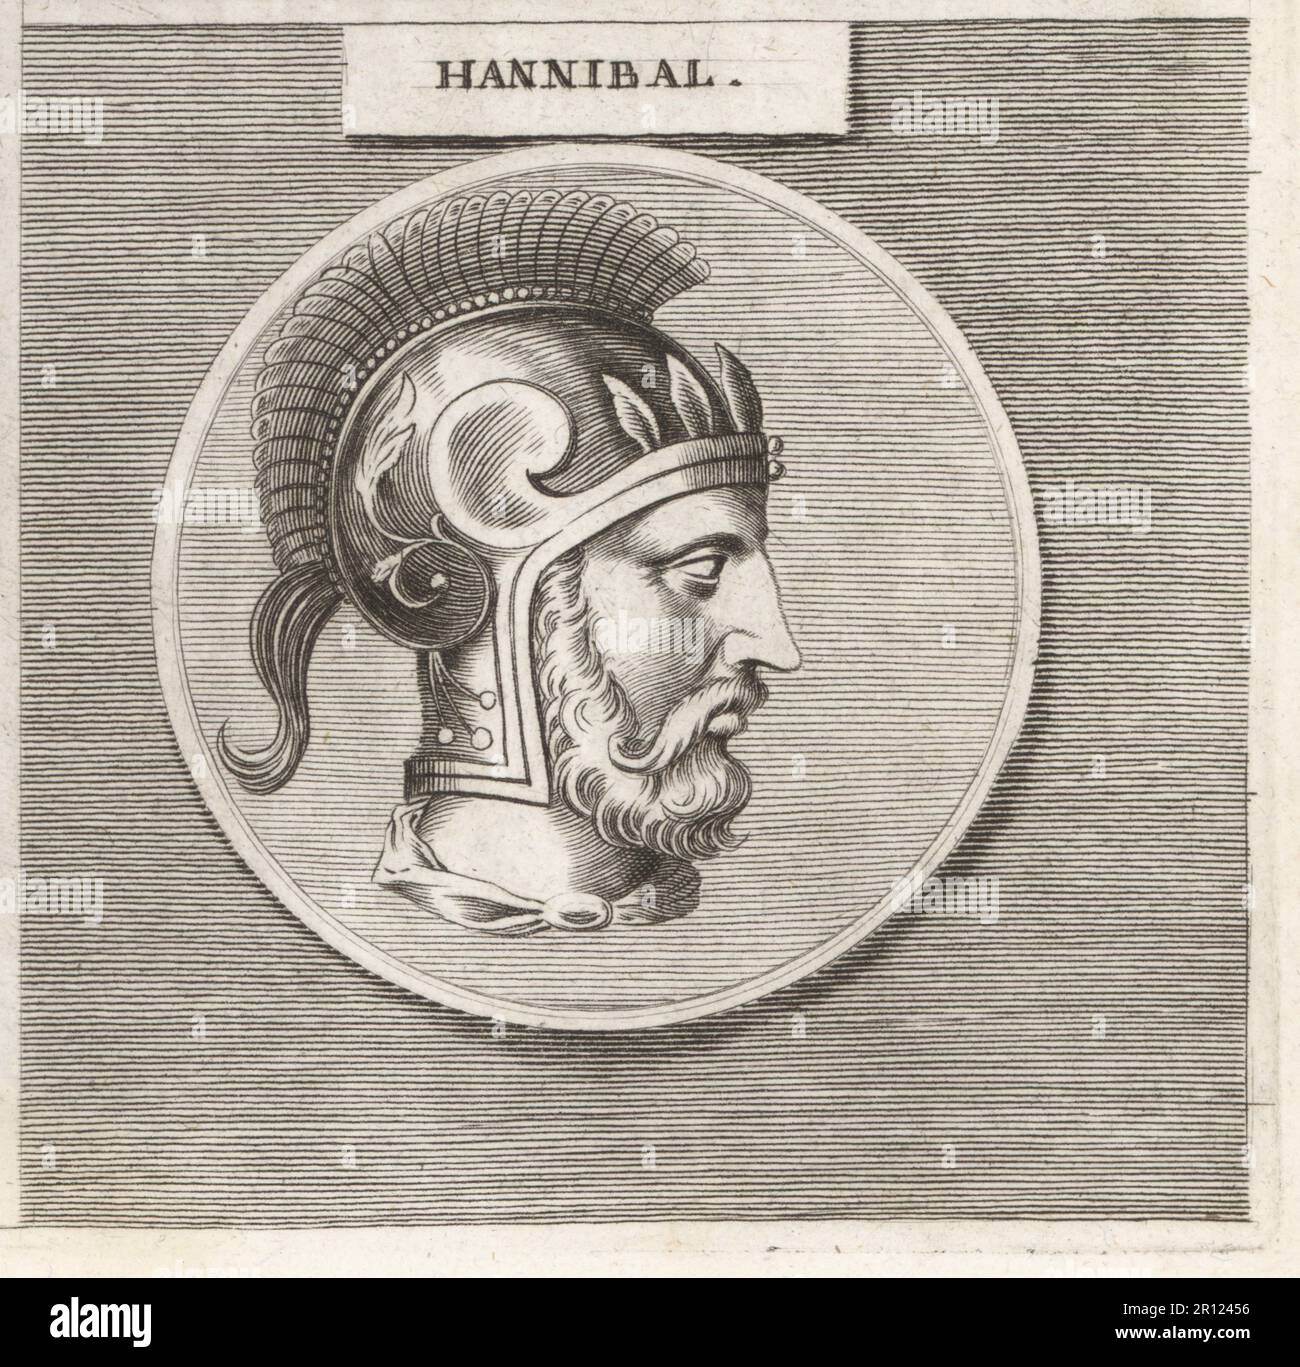 Hannibal, Carthaginian general, c.247-183 BC. Son of Hamilcar Barca, commanded the forces of Carthage against the Roman Republic during the Second Punic War. Profile of bearded man in crested helmet. Hannibal. Copperplate engraving after an illustration by Joachim von Sandrart from his L’Academia Todesca, della Architectura, Scultura & Pittura, oder Teutsche Academie, der Edlen Bau- Bild- und Mahlerey-Kunste, German Academy of Architecture, Sculpture and Painting, Jacob von Sandrart, Nuremberg, 1675. Stock Photo